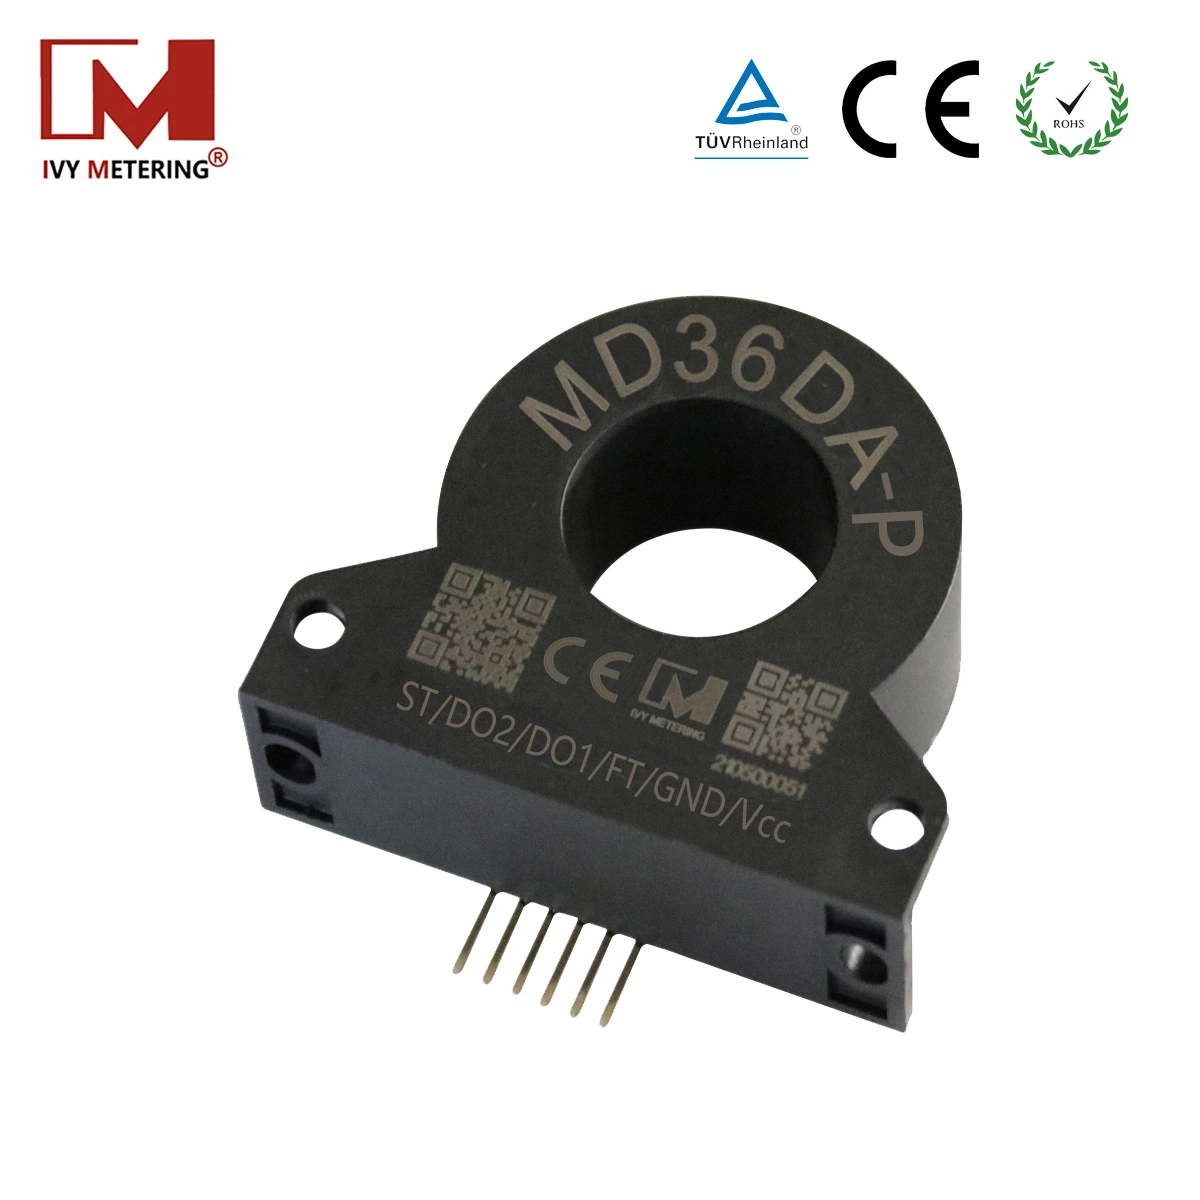 Evse PCB Mount RCD CT 6mA DC Leakage Protection Residual Current Sensor with Self-Test Function